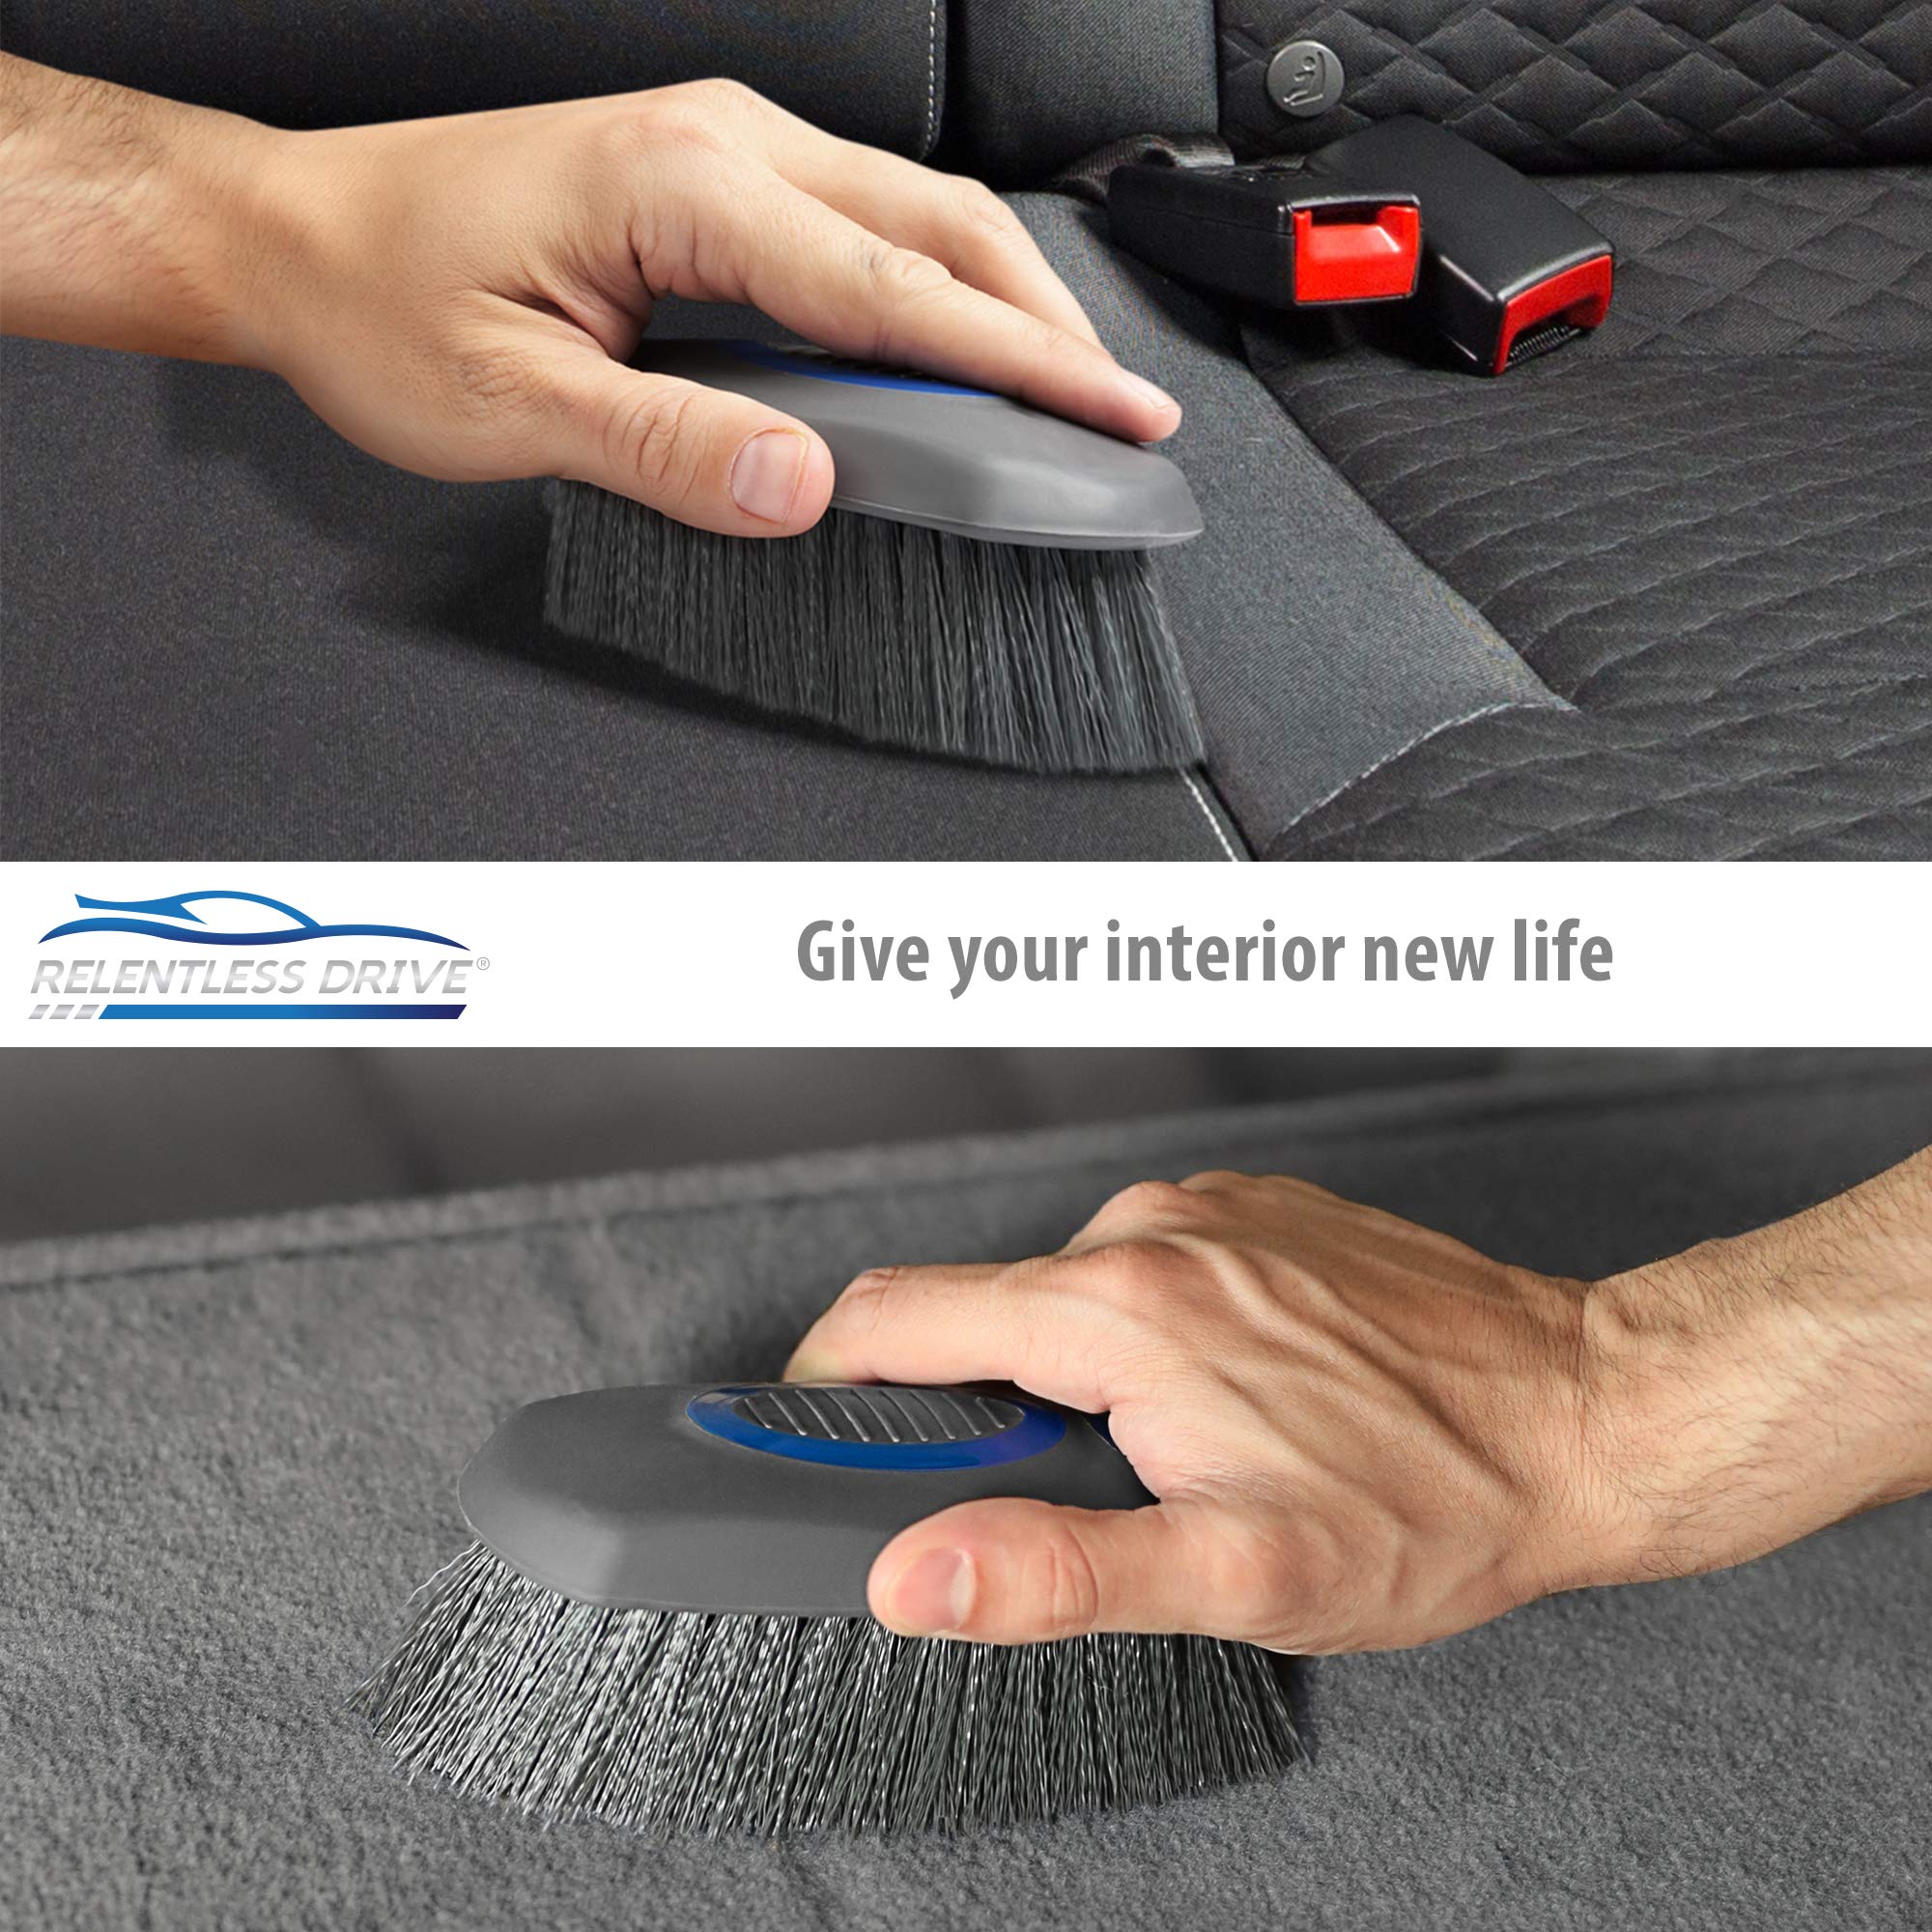 Relentless Drive Upholstery Brush Works as Carpet Brush and Leather Br